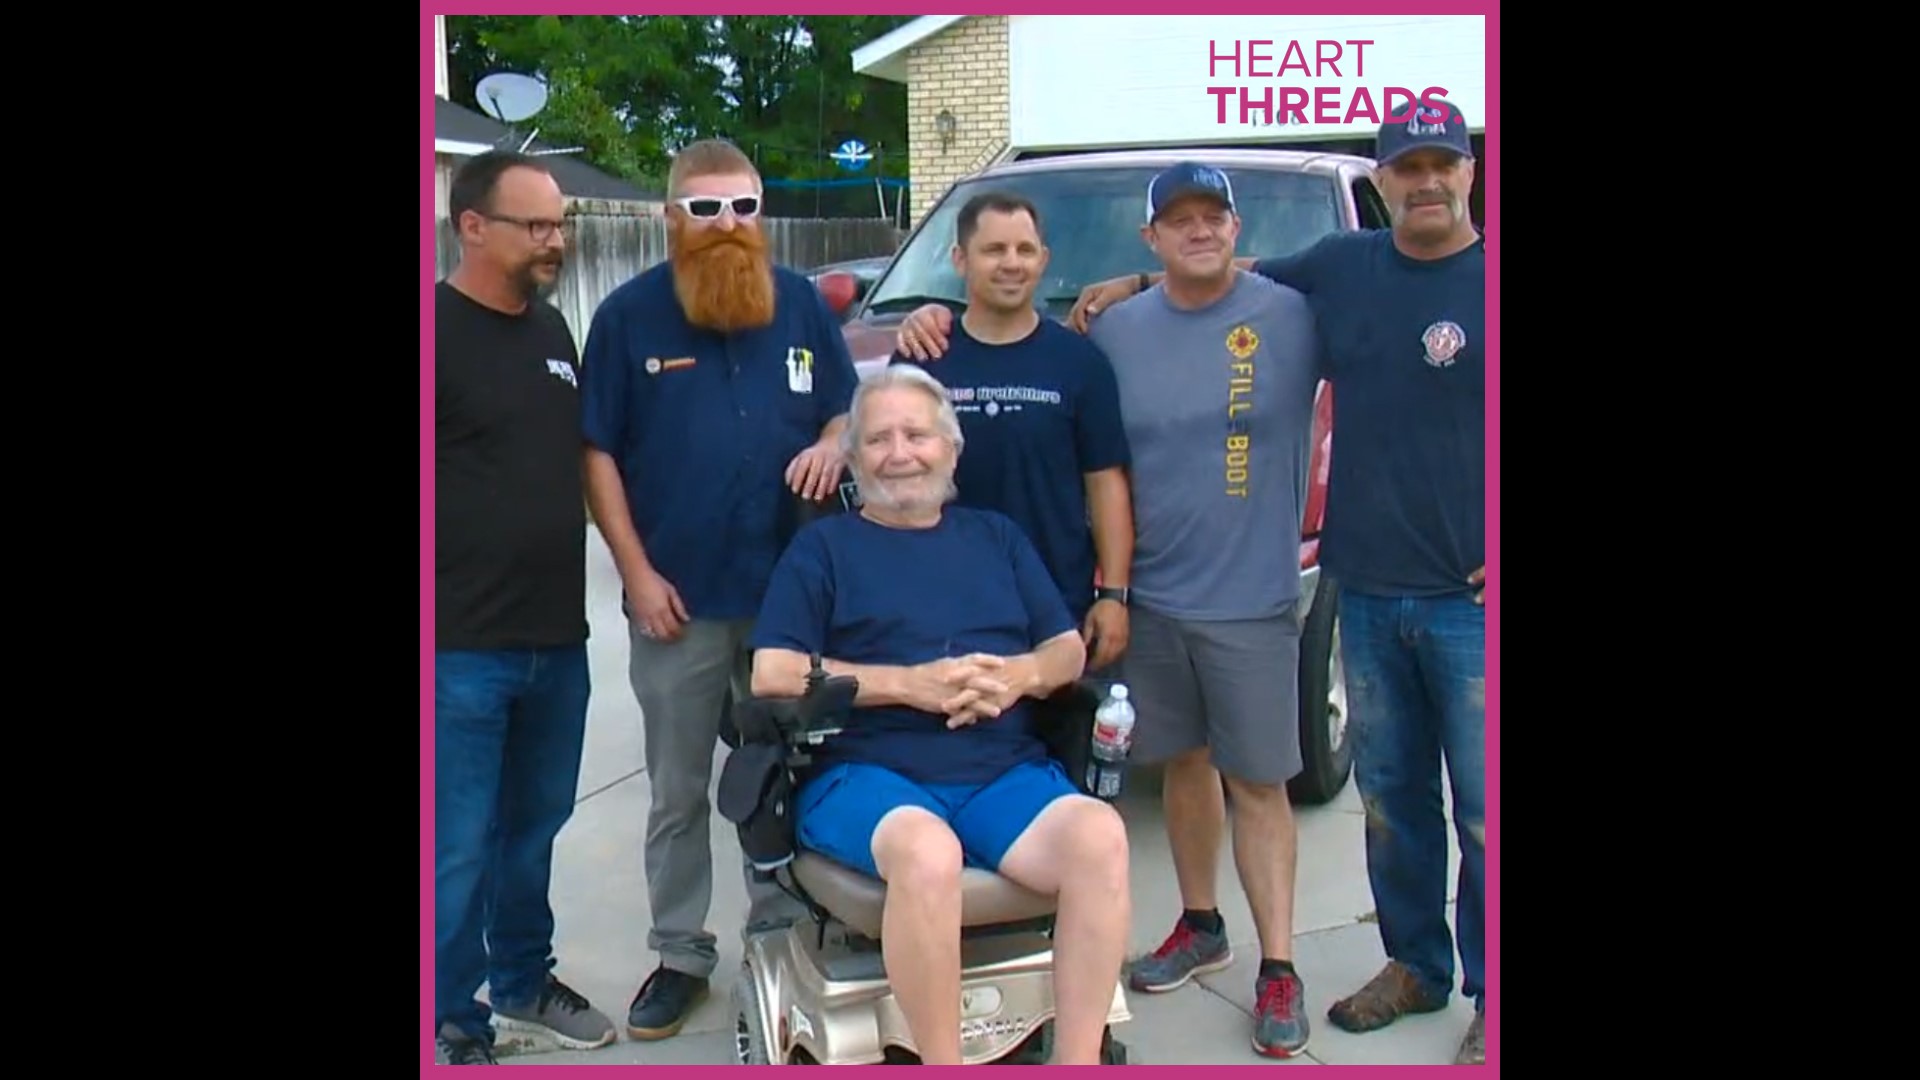 Veteran Dewey Treat is disabled and needed a new ramp to get in and out of his house. His neighbors and the local fire department stepped up immediately to help him.